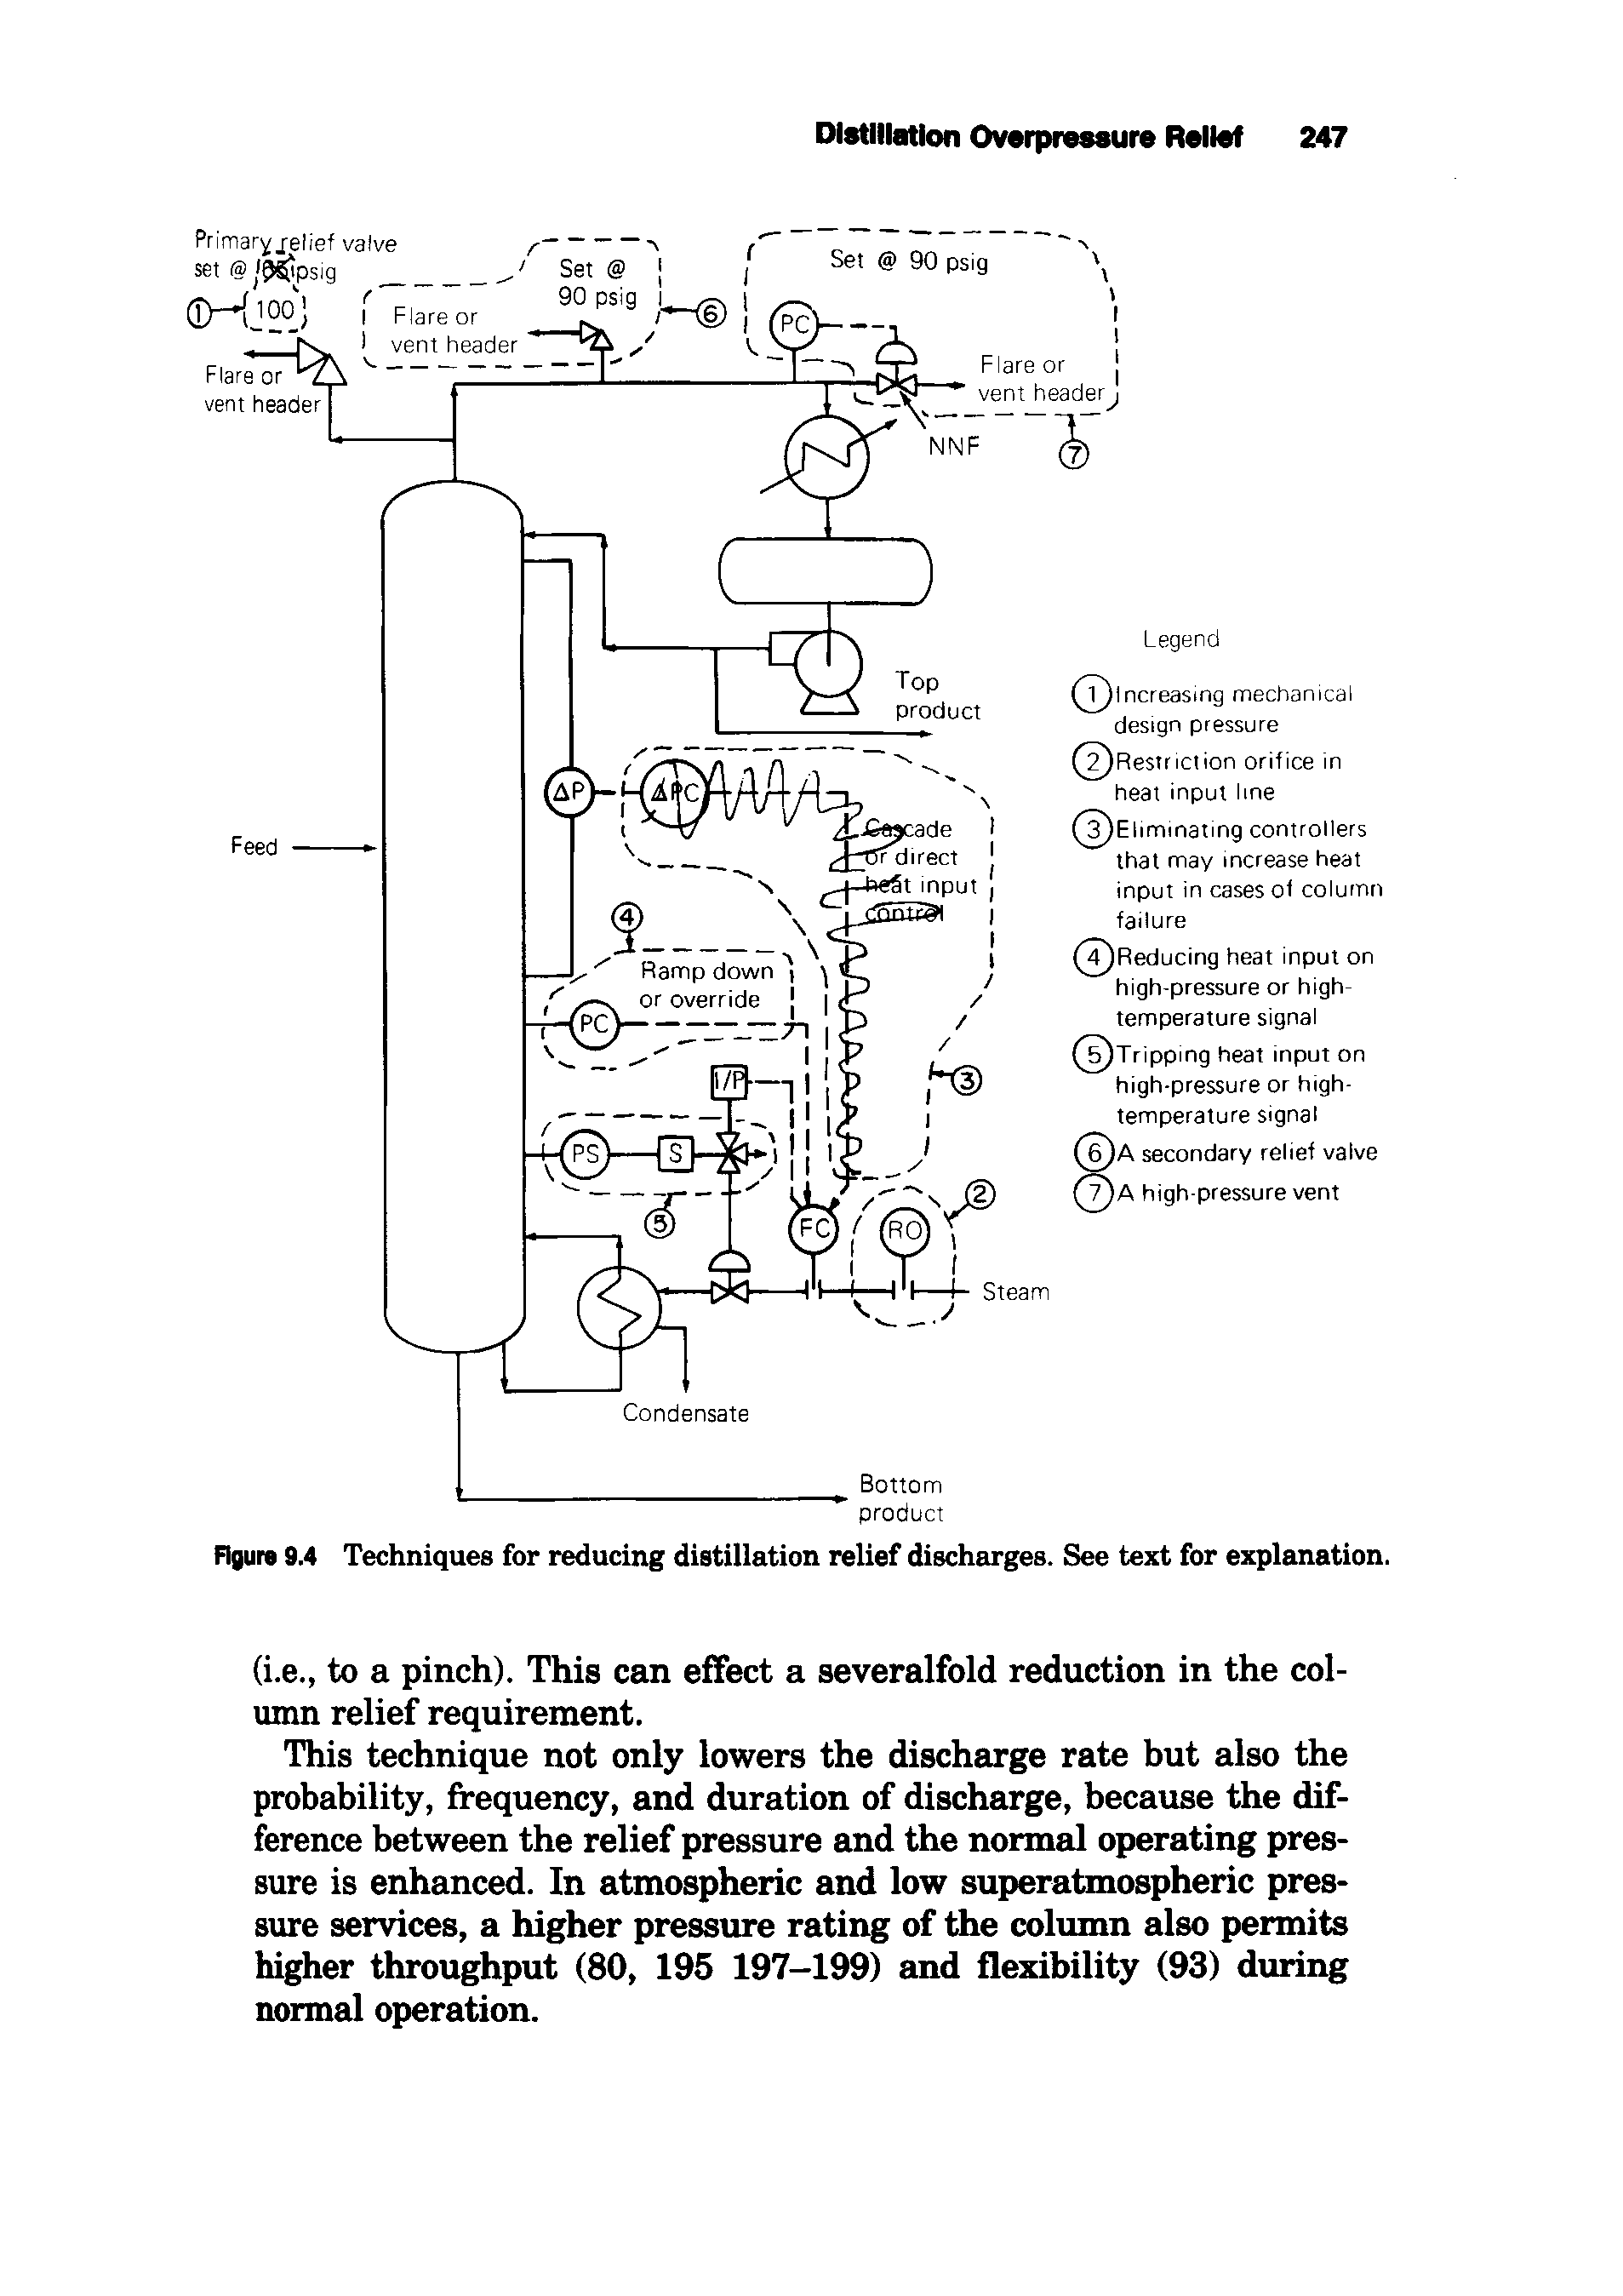 Figure 9.4 Techniques for reducing distillation relief discharges. See text for explanation.